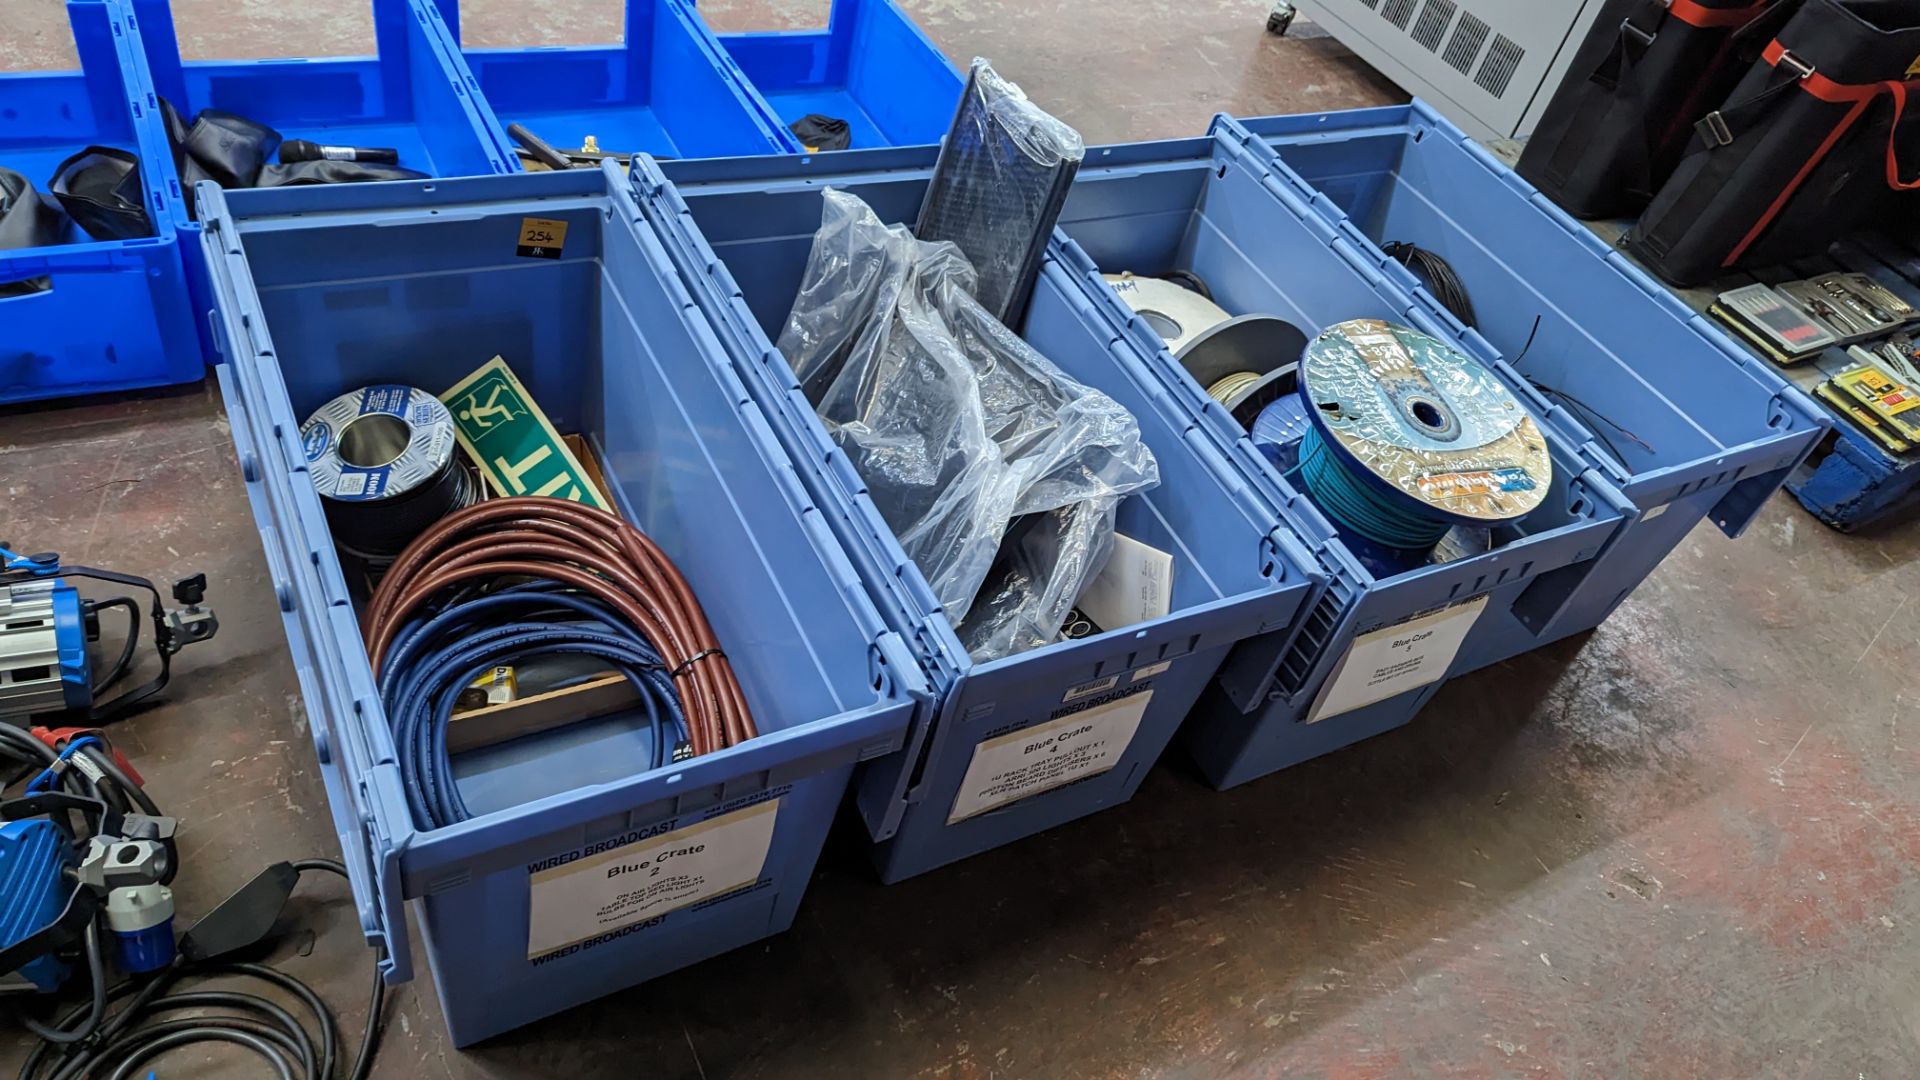 Contents of 4 crates of assorted cable and other items. N.B. crates excluded